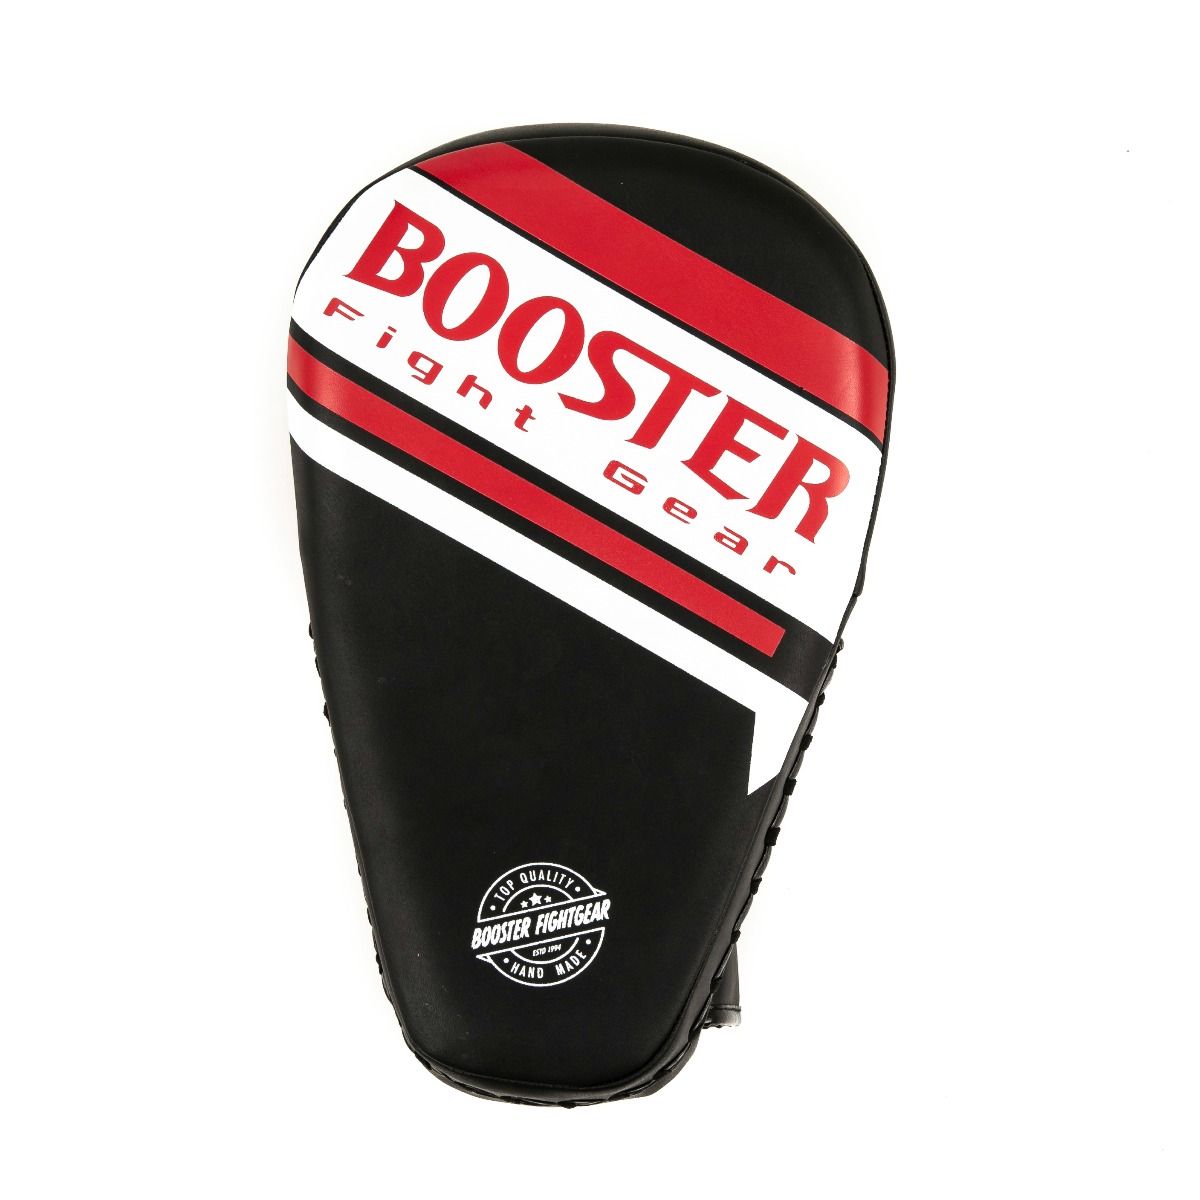 Booster Fight Gear-Trappads-Stootpads-Mitts-PML BC 5-Zwart-Rood-Wit